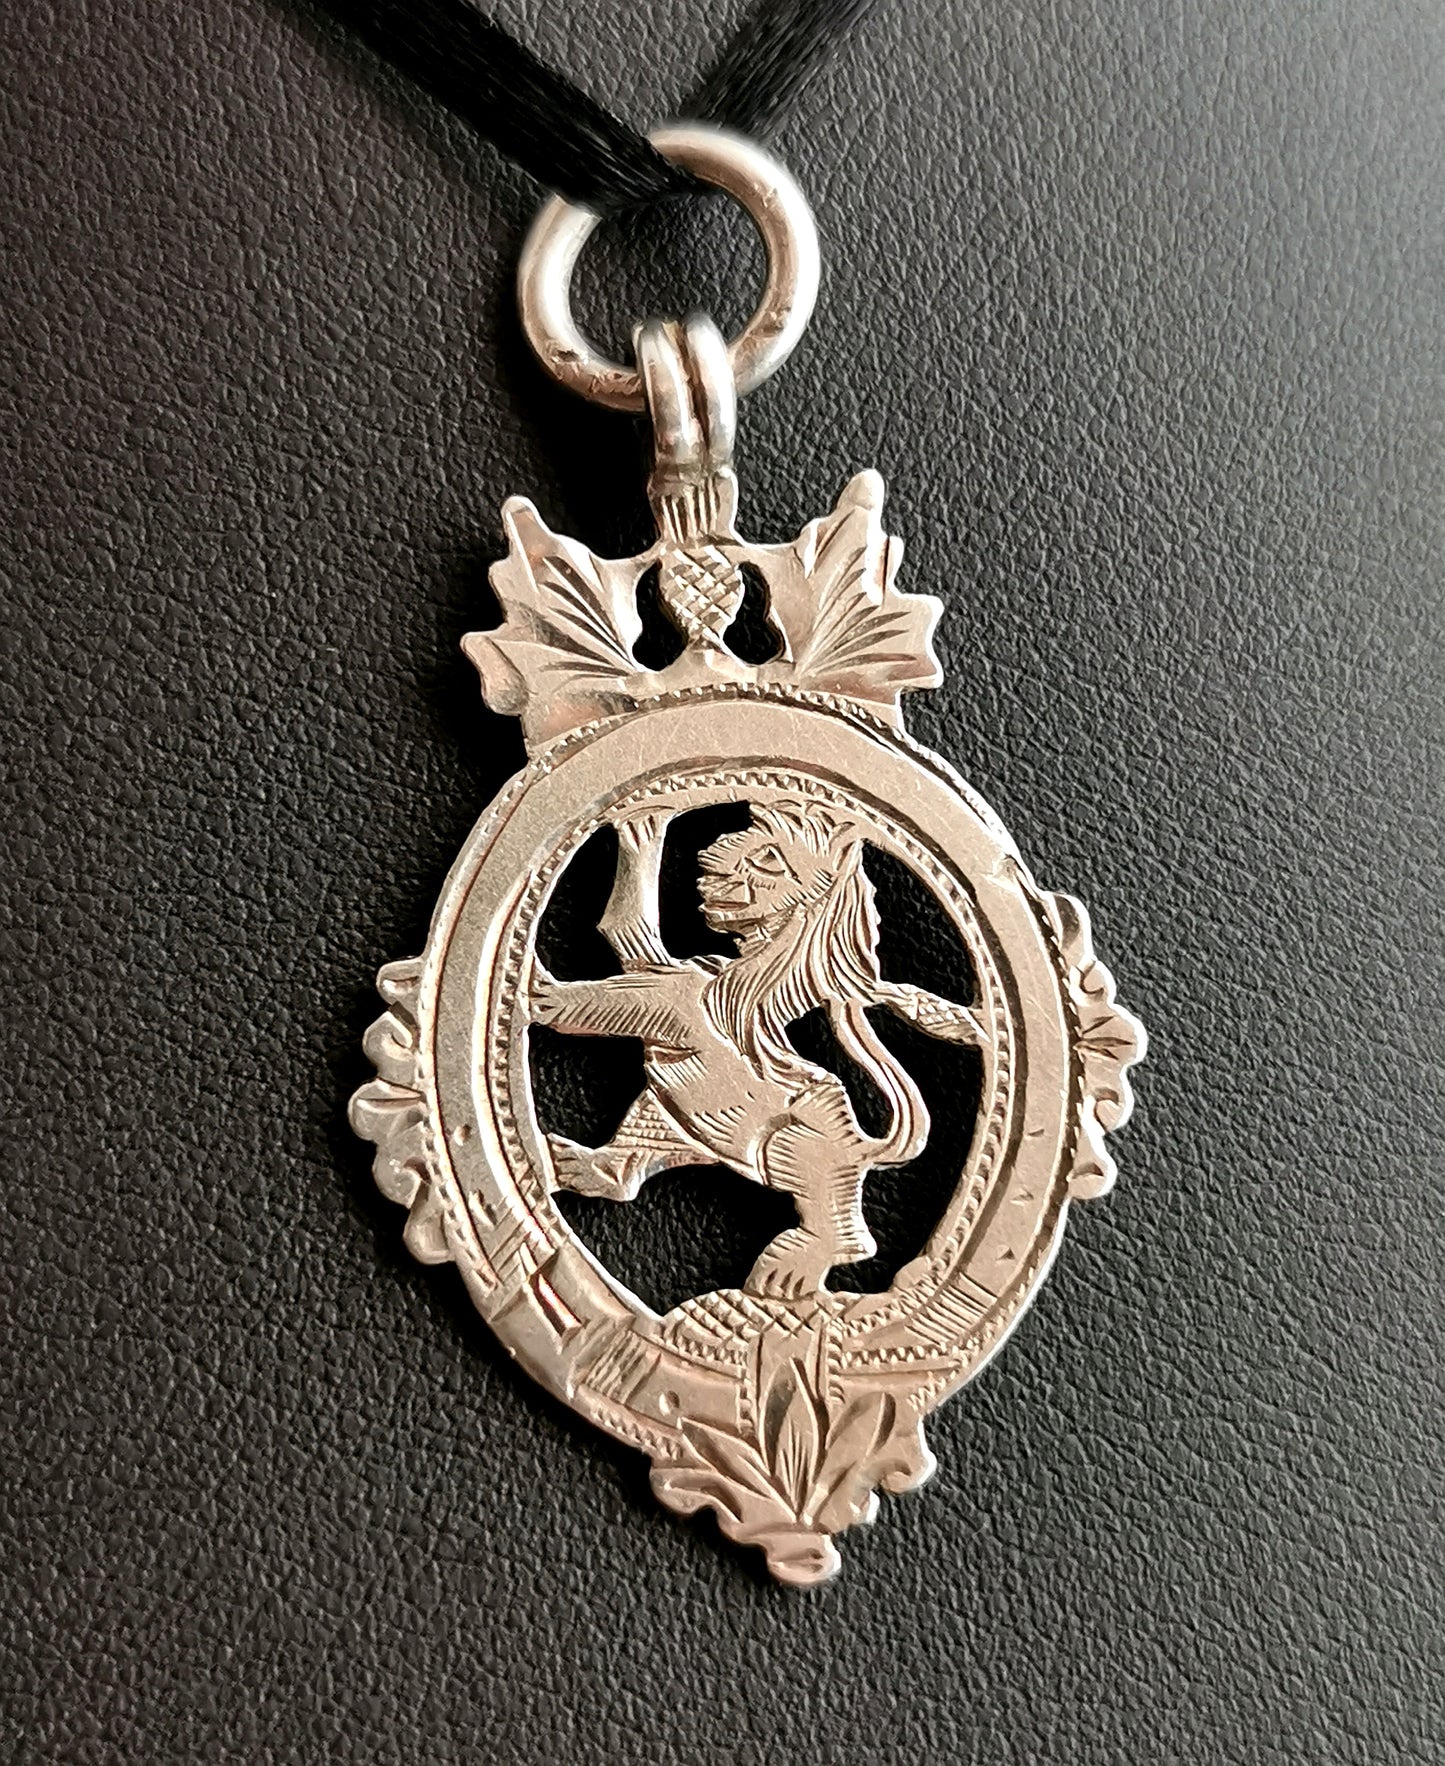 Vintage sterling silver fob pendant, Lion, Thistle and buckle